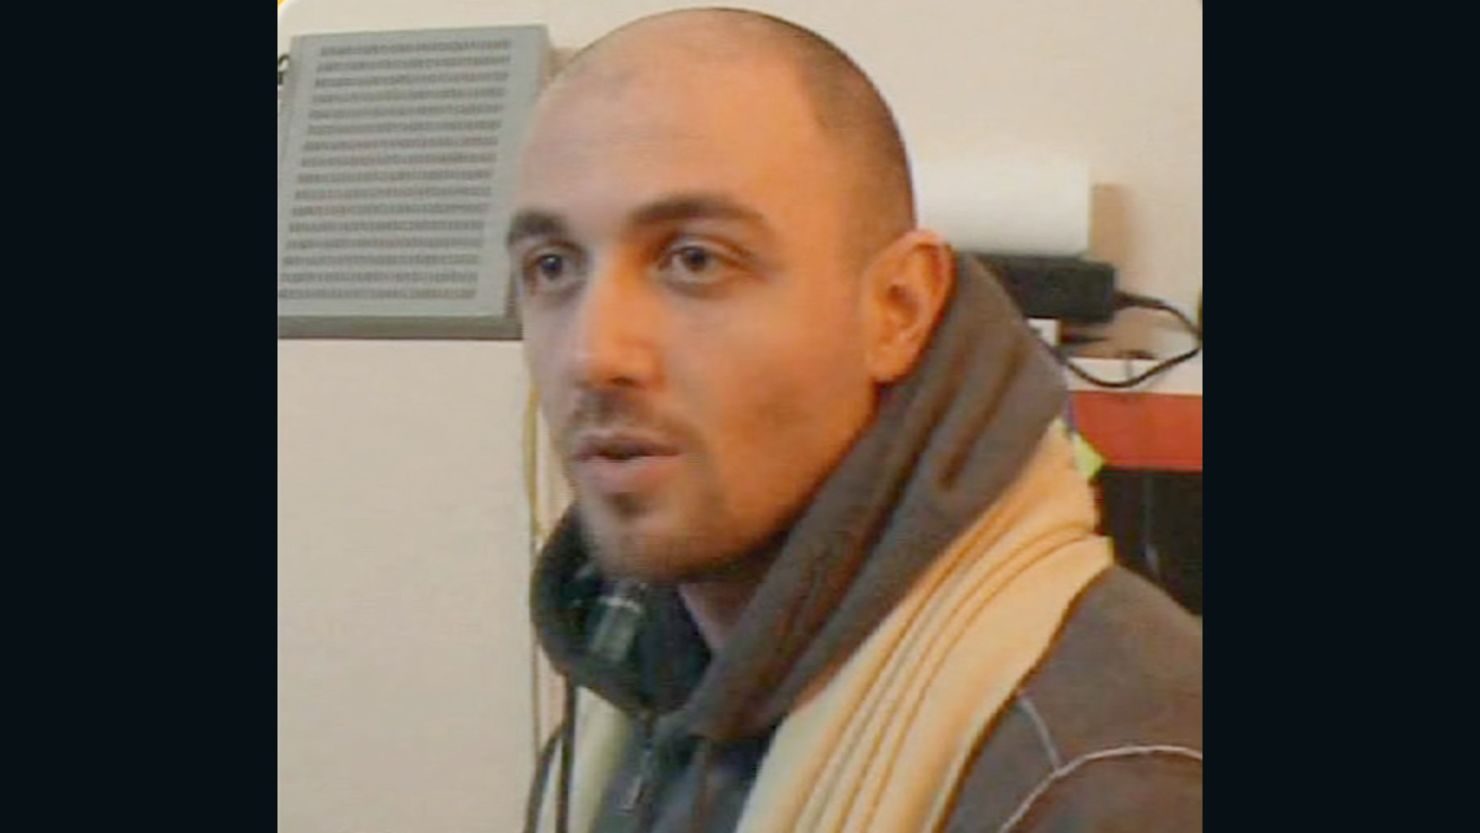 Mohammed "Mo" Nabbous started a livestream online that captured the Libyan regime's crackdown on protesters.